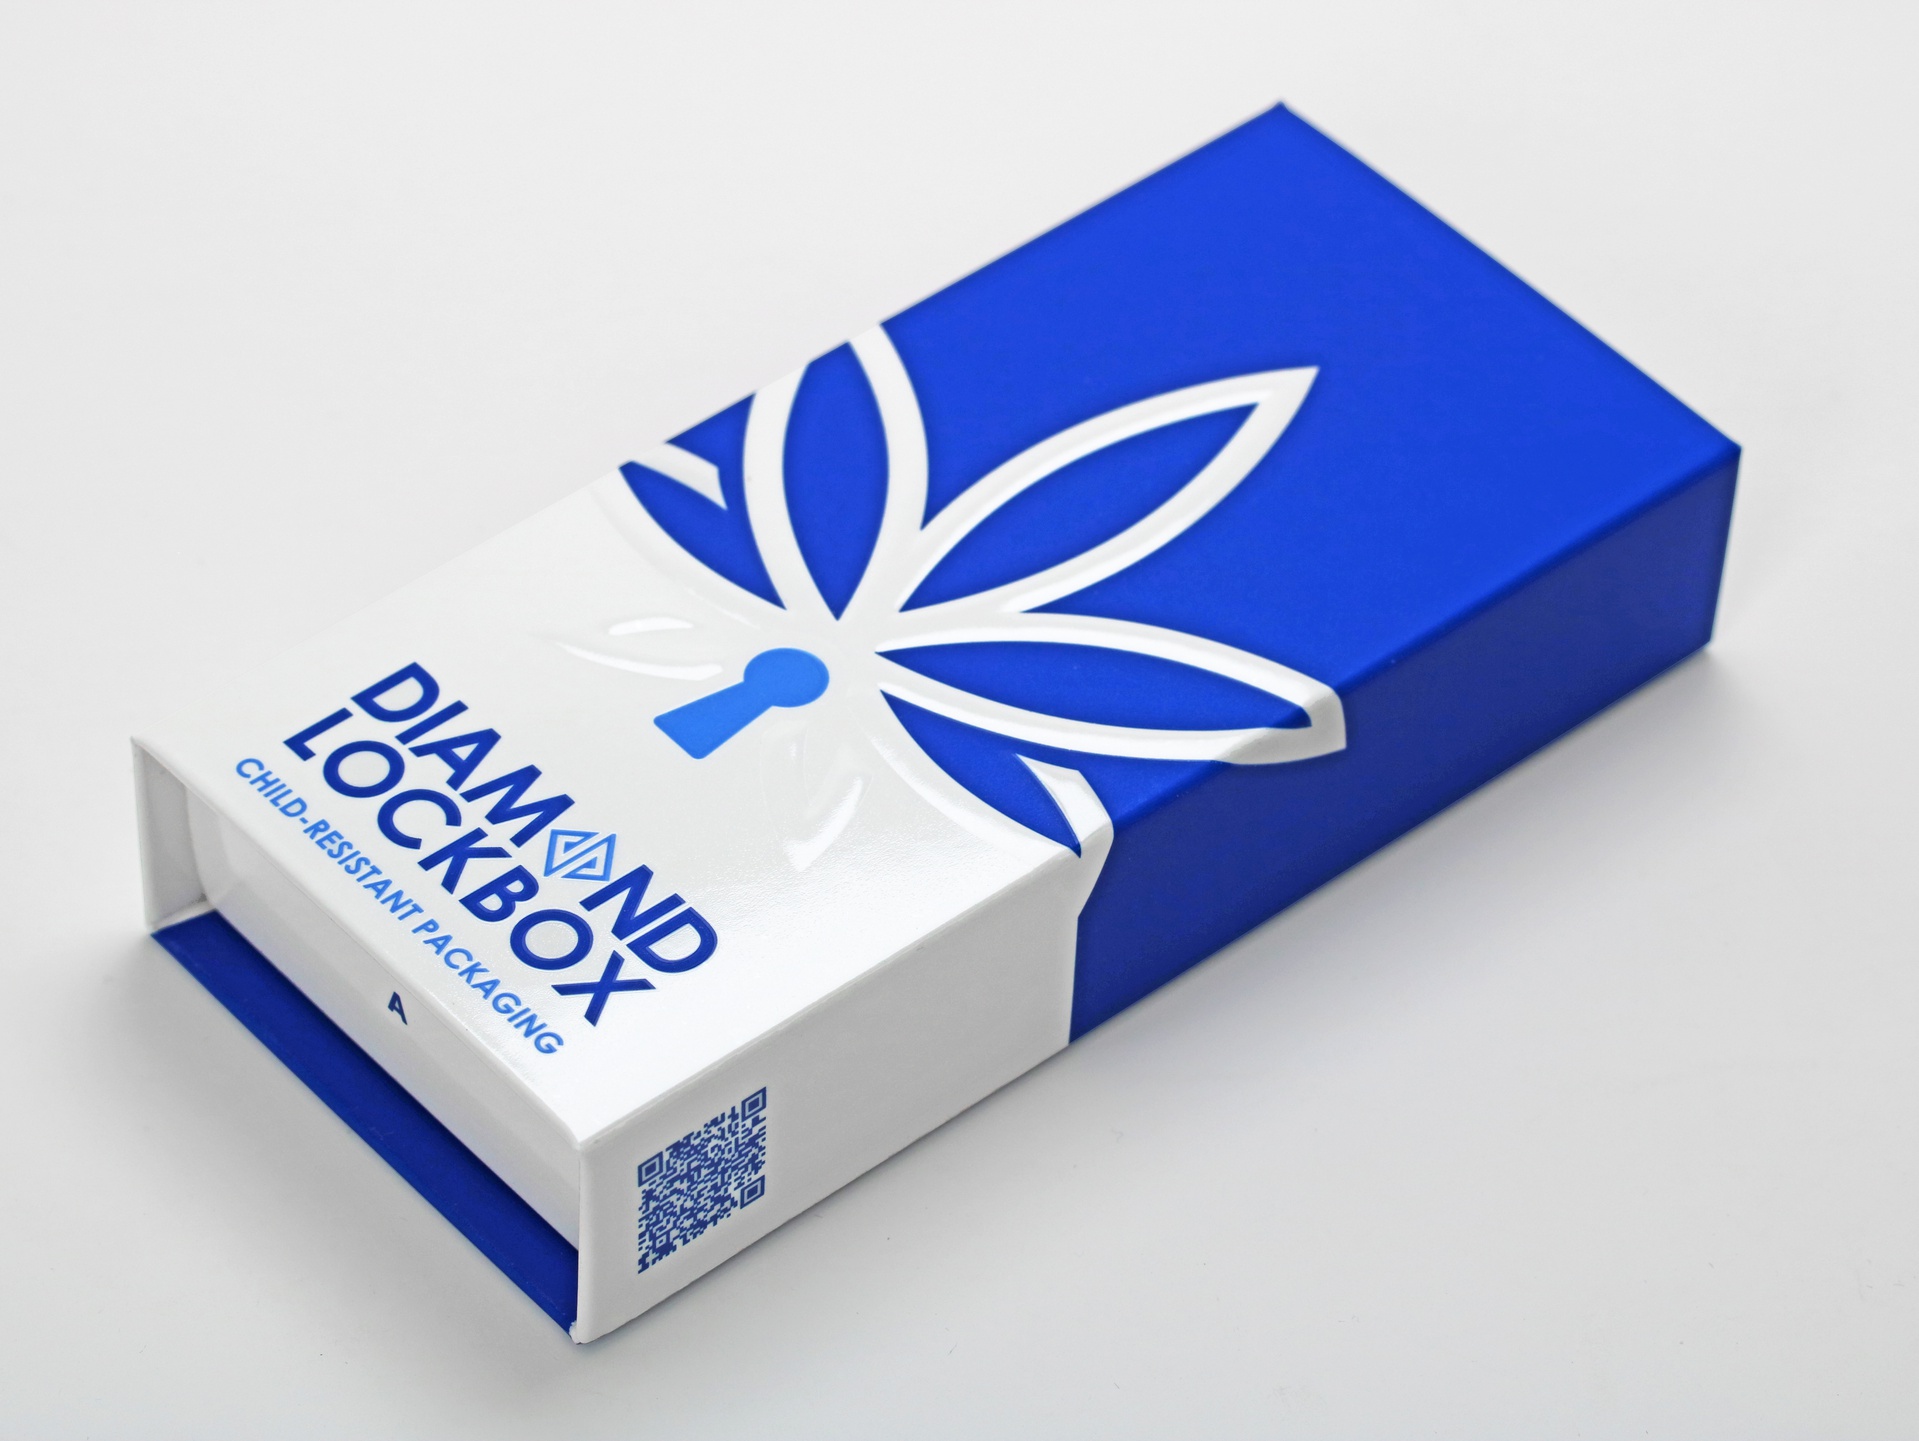 Diamond Lockbox™ certified child-resistant (CR) cannabis packaging (blue and white)